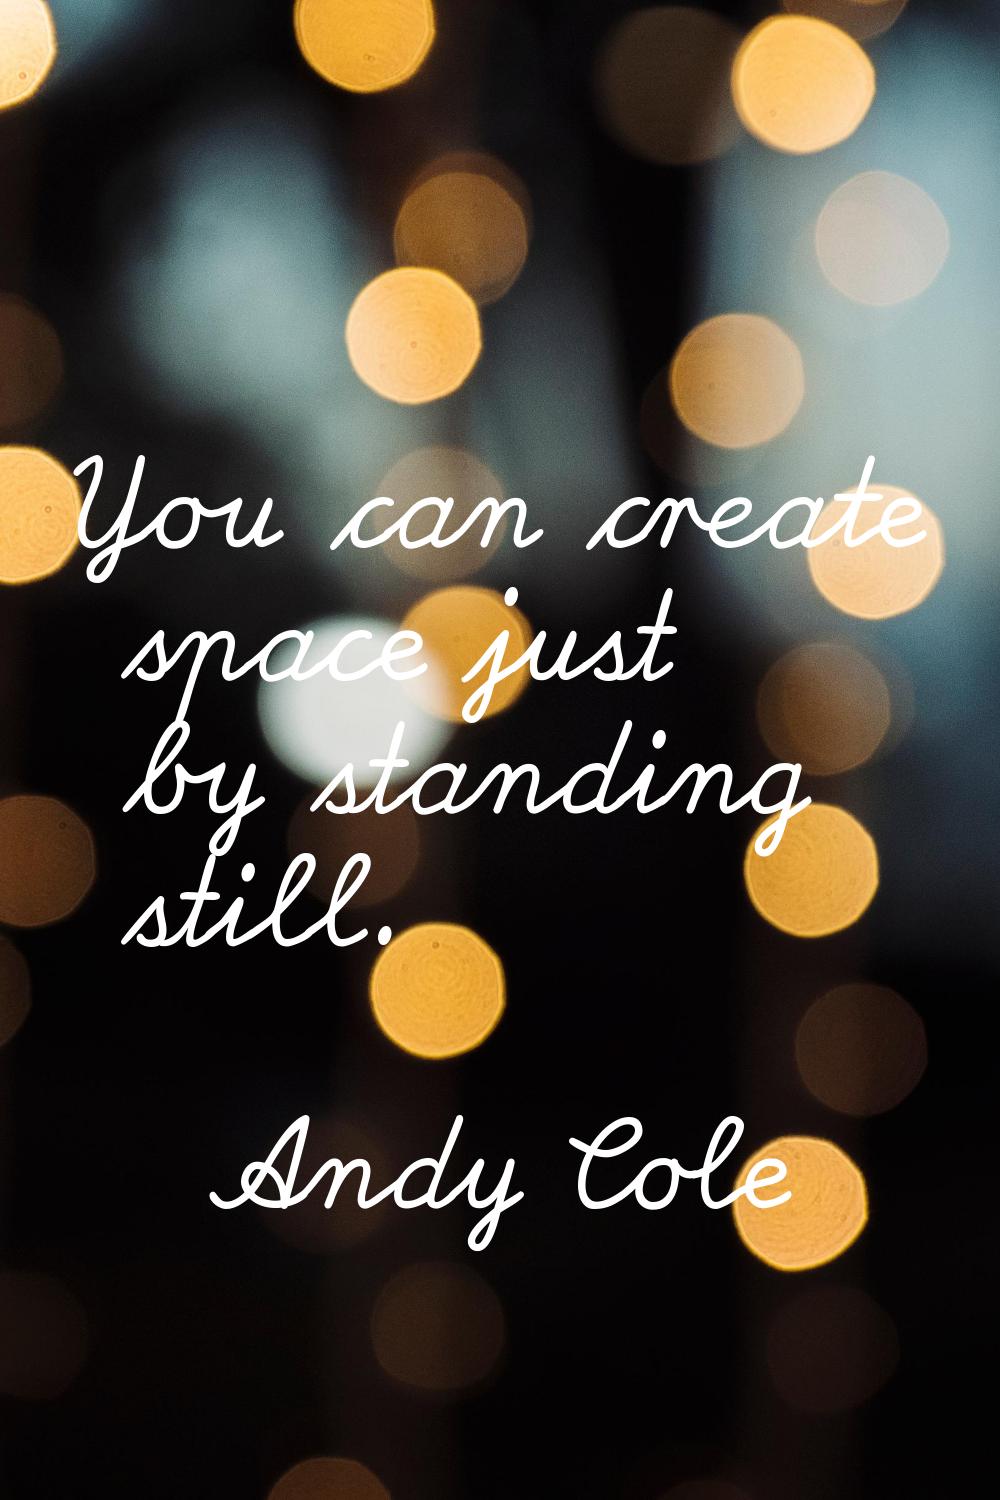 You can create space just by standing still.